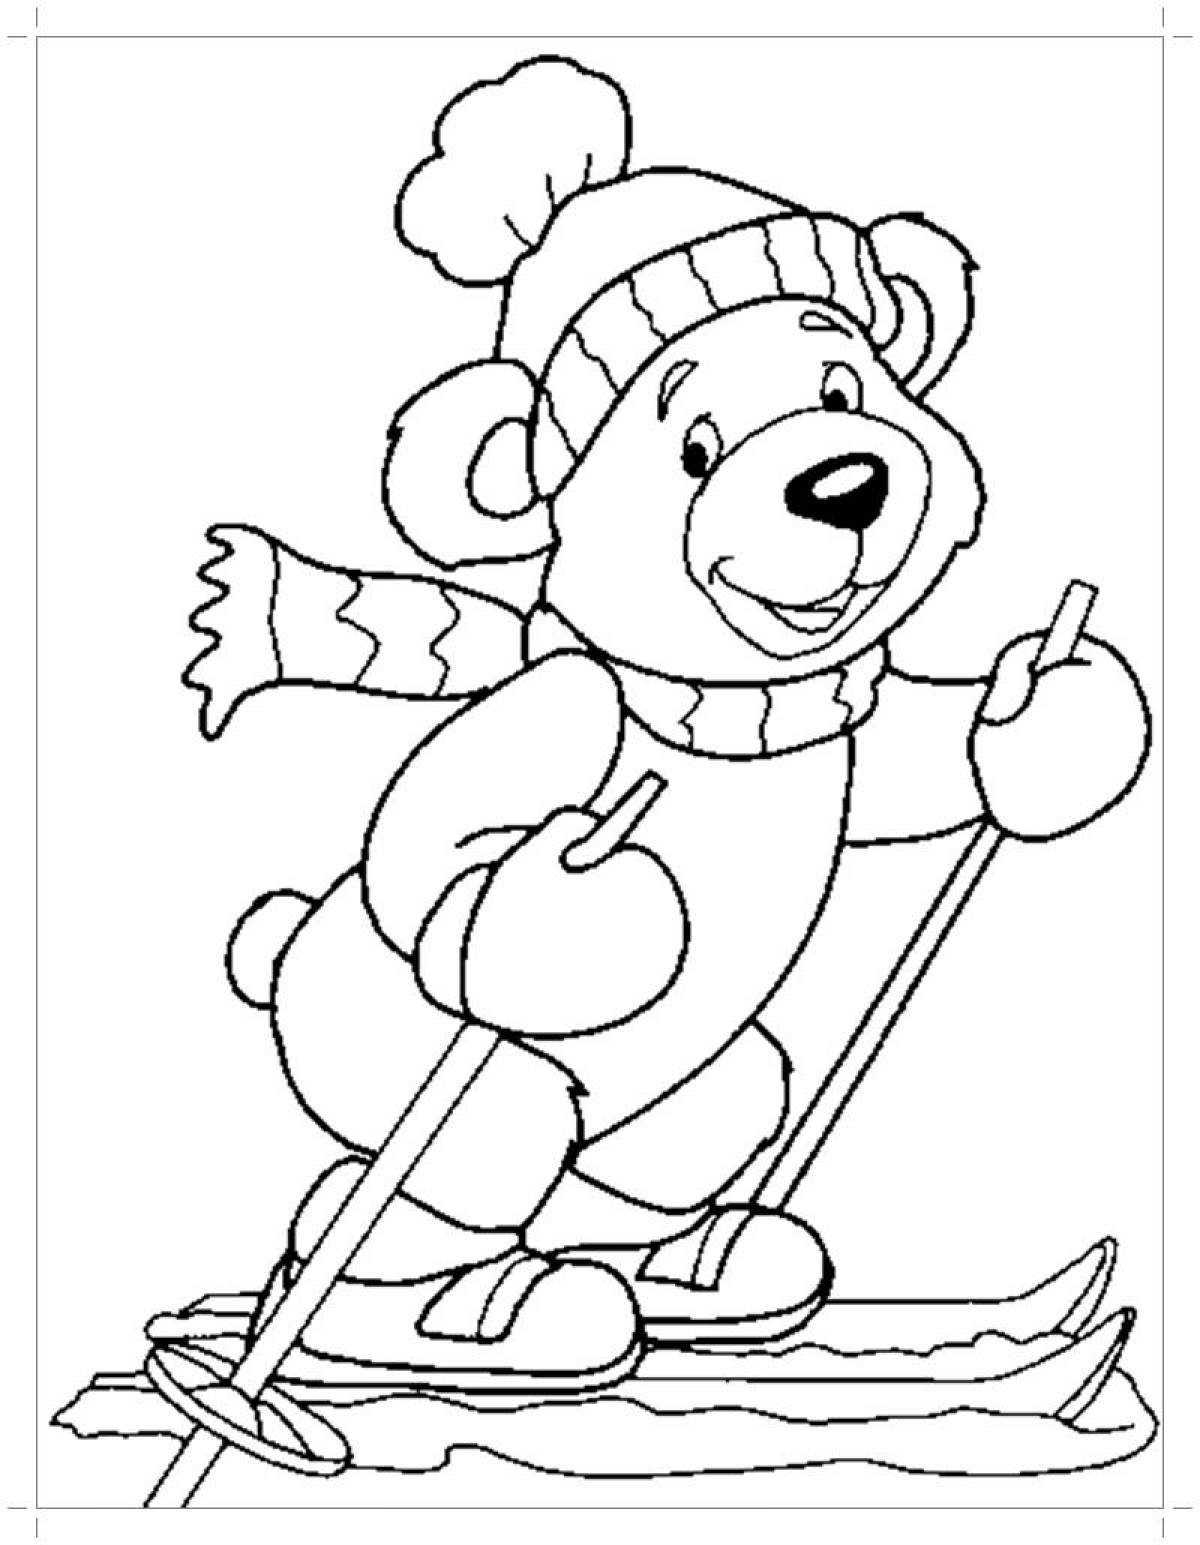 Amazing winter coloring book for kids 3-4 years old